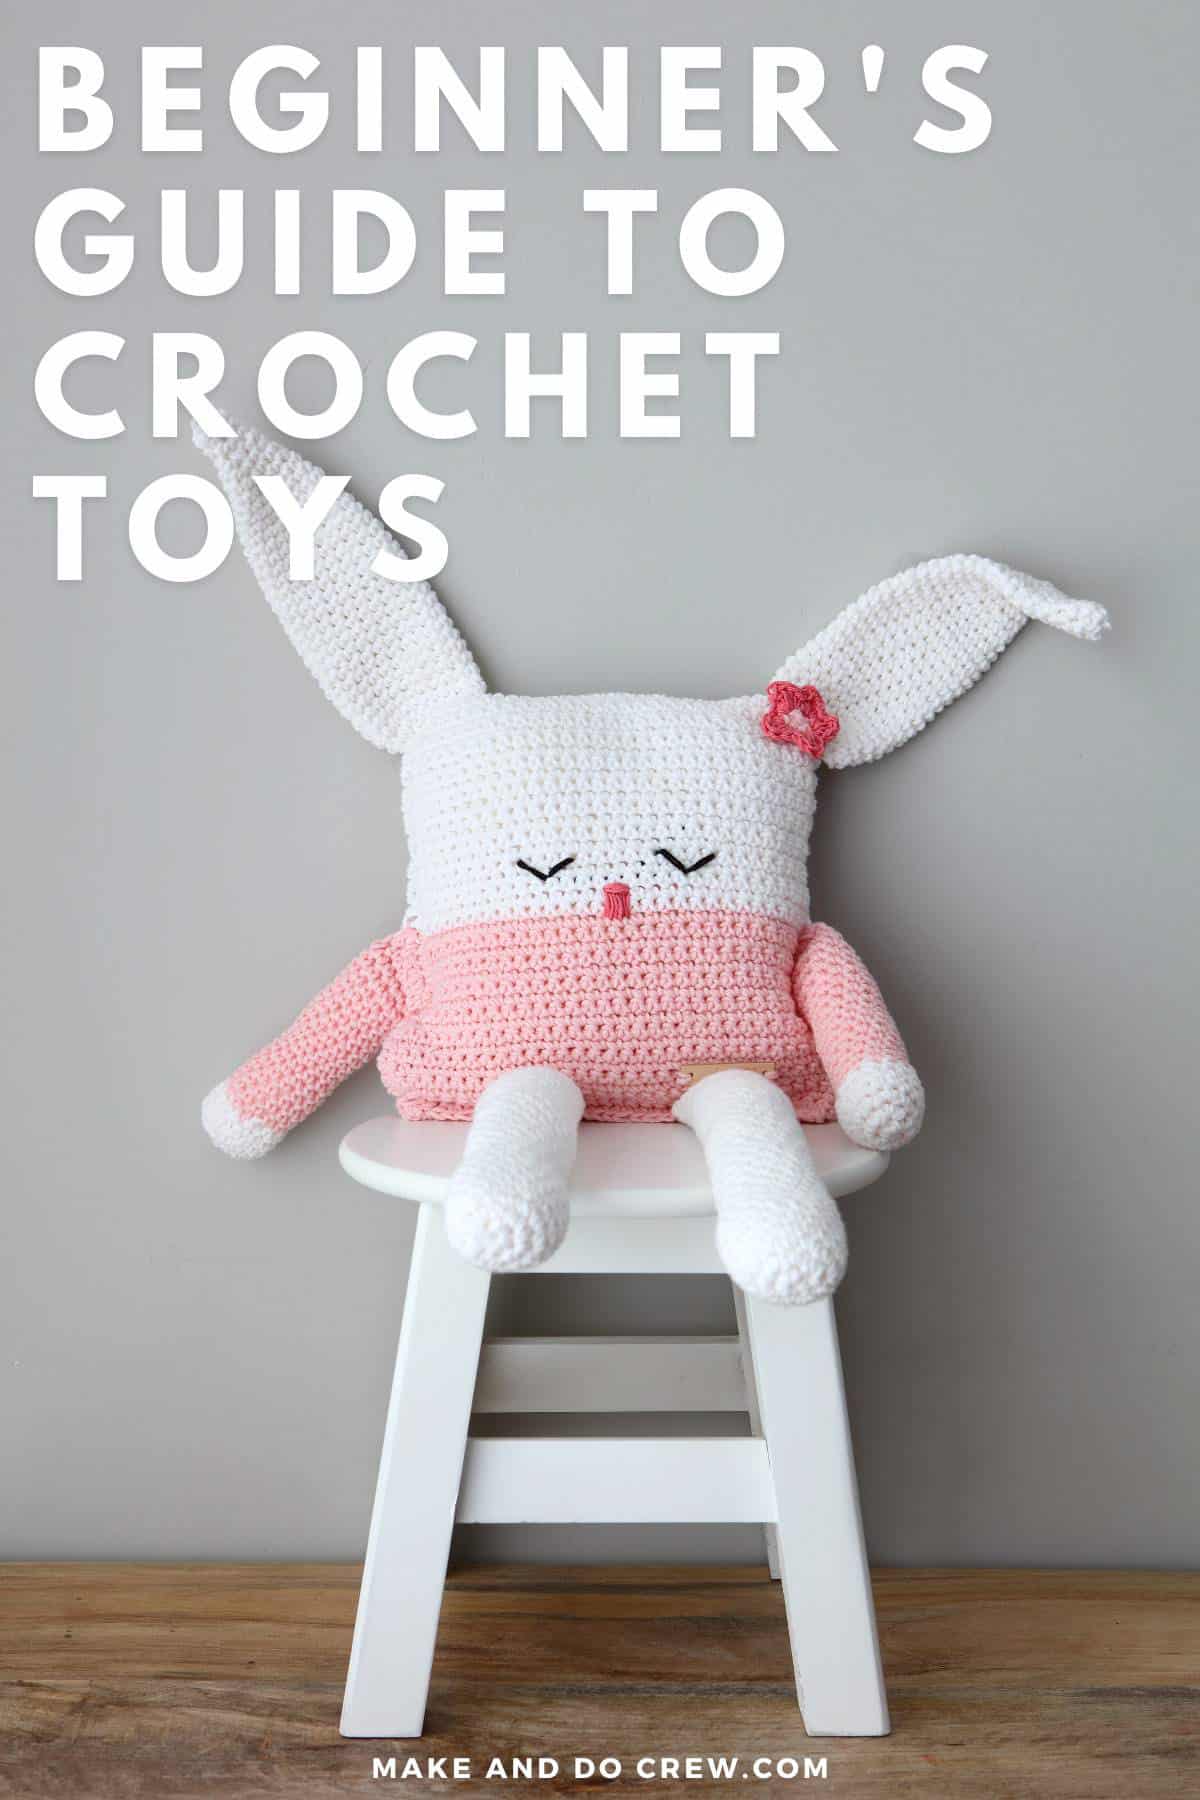 A crocheted bunny amigurumi doll is sitting on a white chair and leaning against a gray wall.